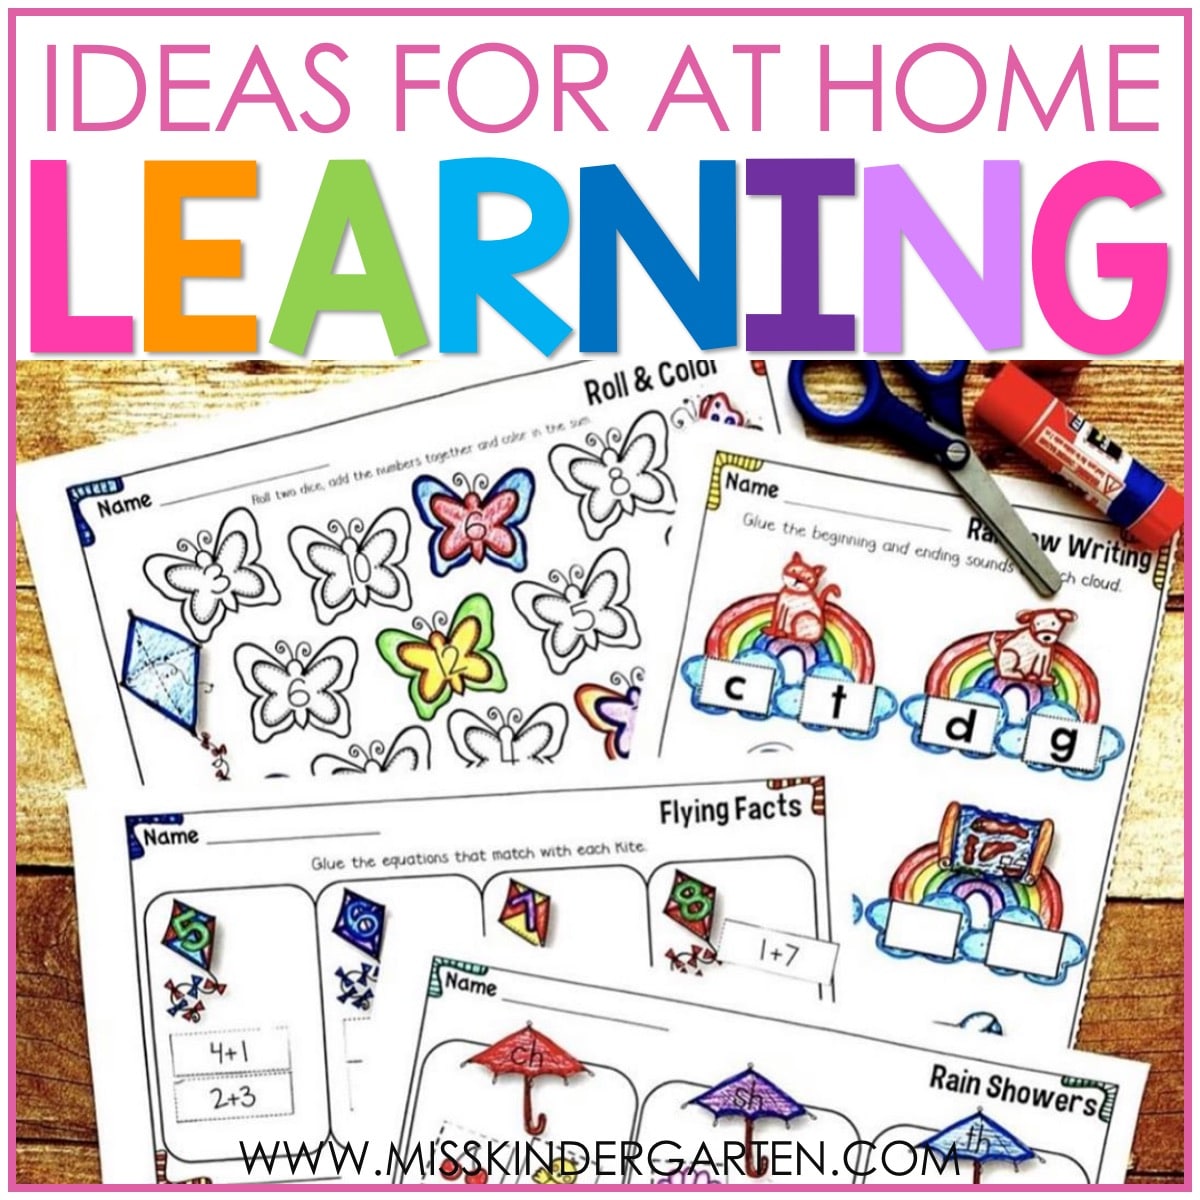 Home - Lessons for Learning